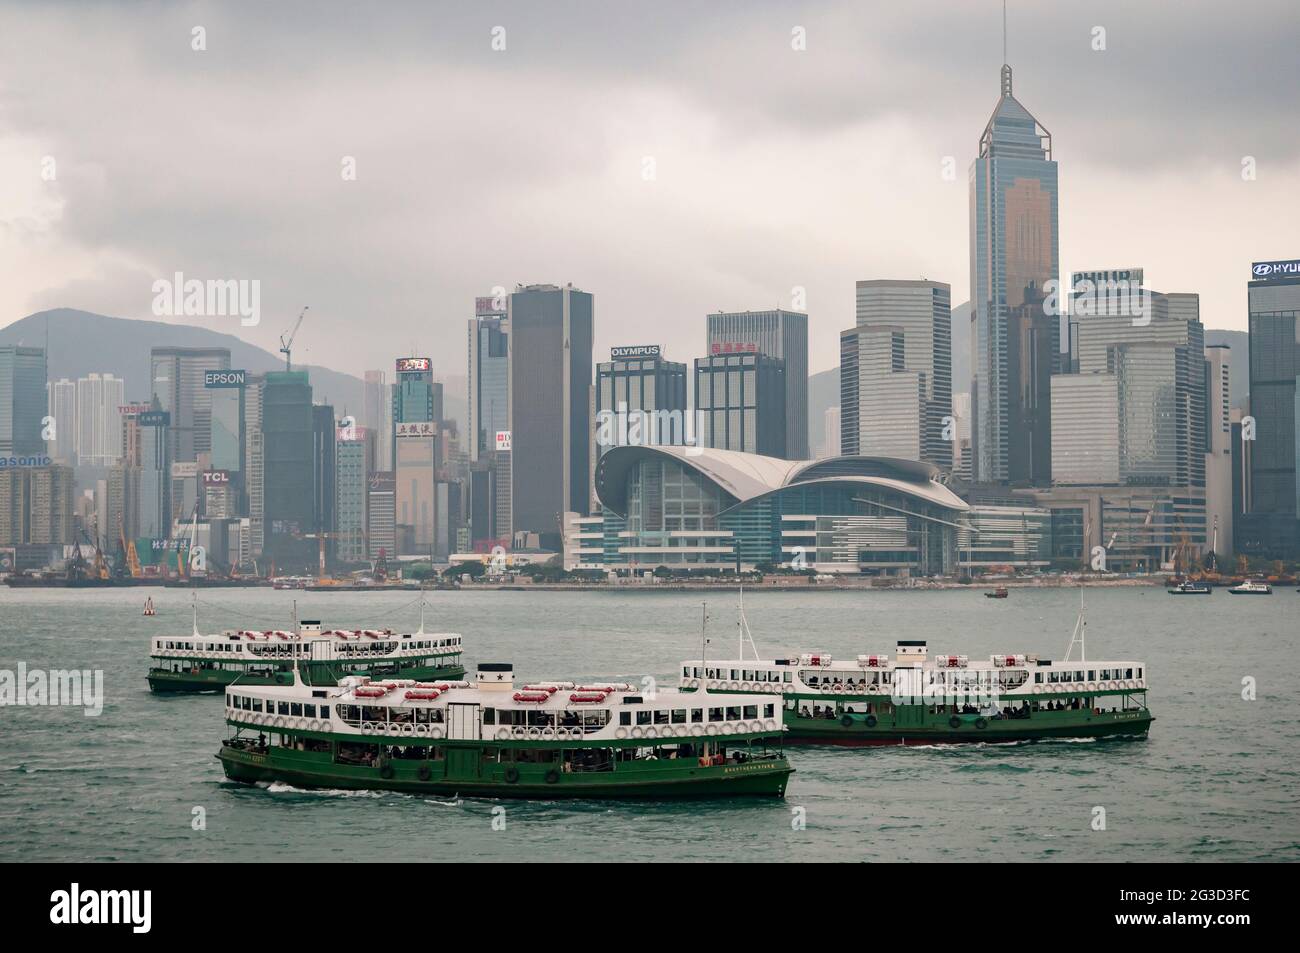 Three iconic Star Ferries - Day Star, Northern Star and Solar Star - pass each other on Victoria Harbour with the Wan Chai skyline in the background Stock Photo